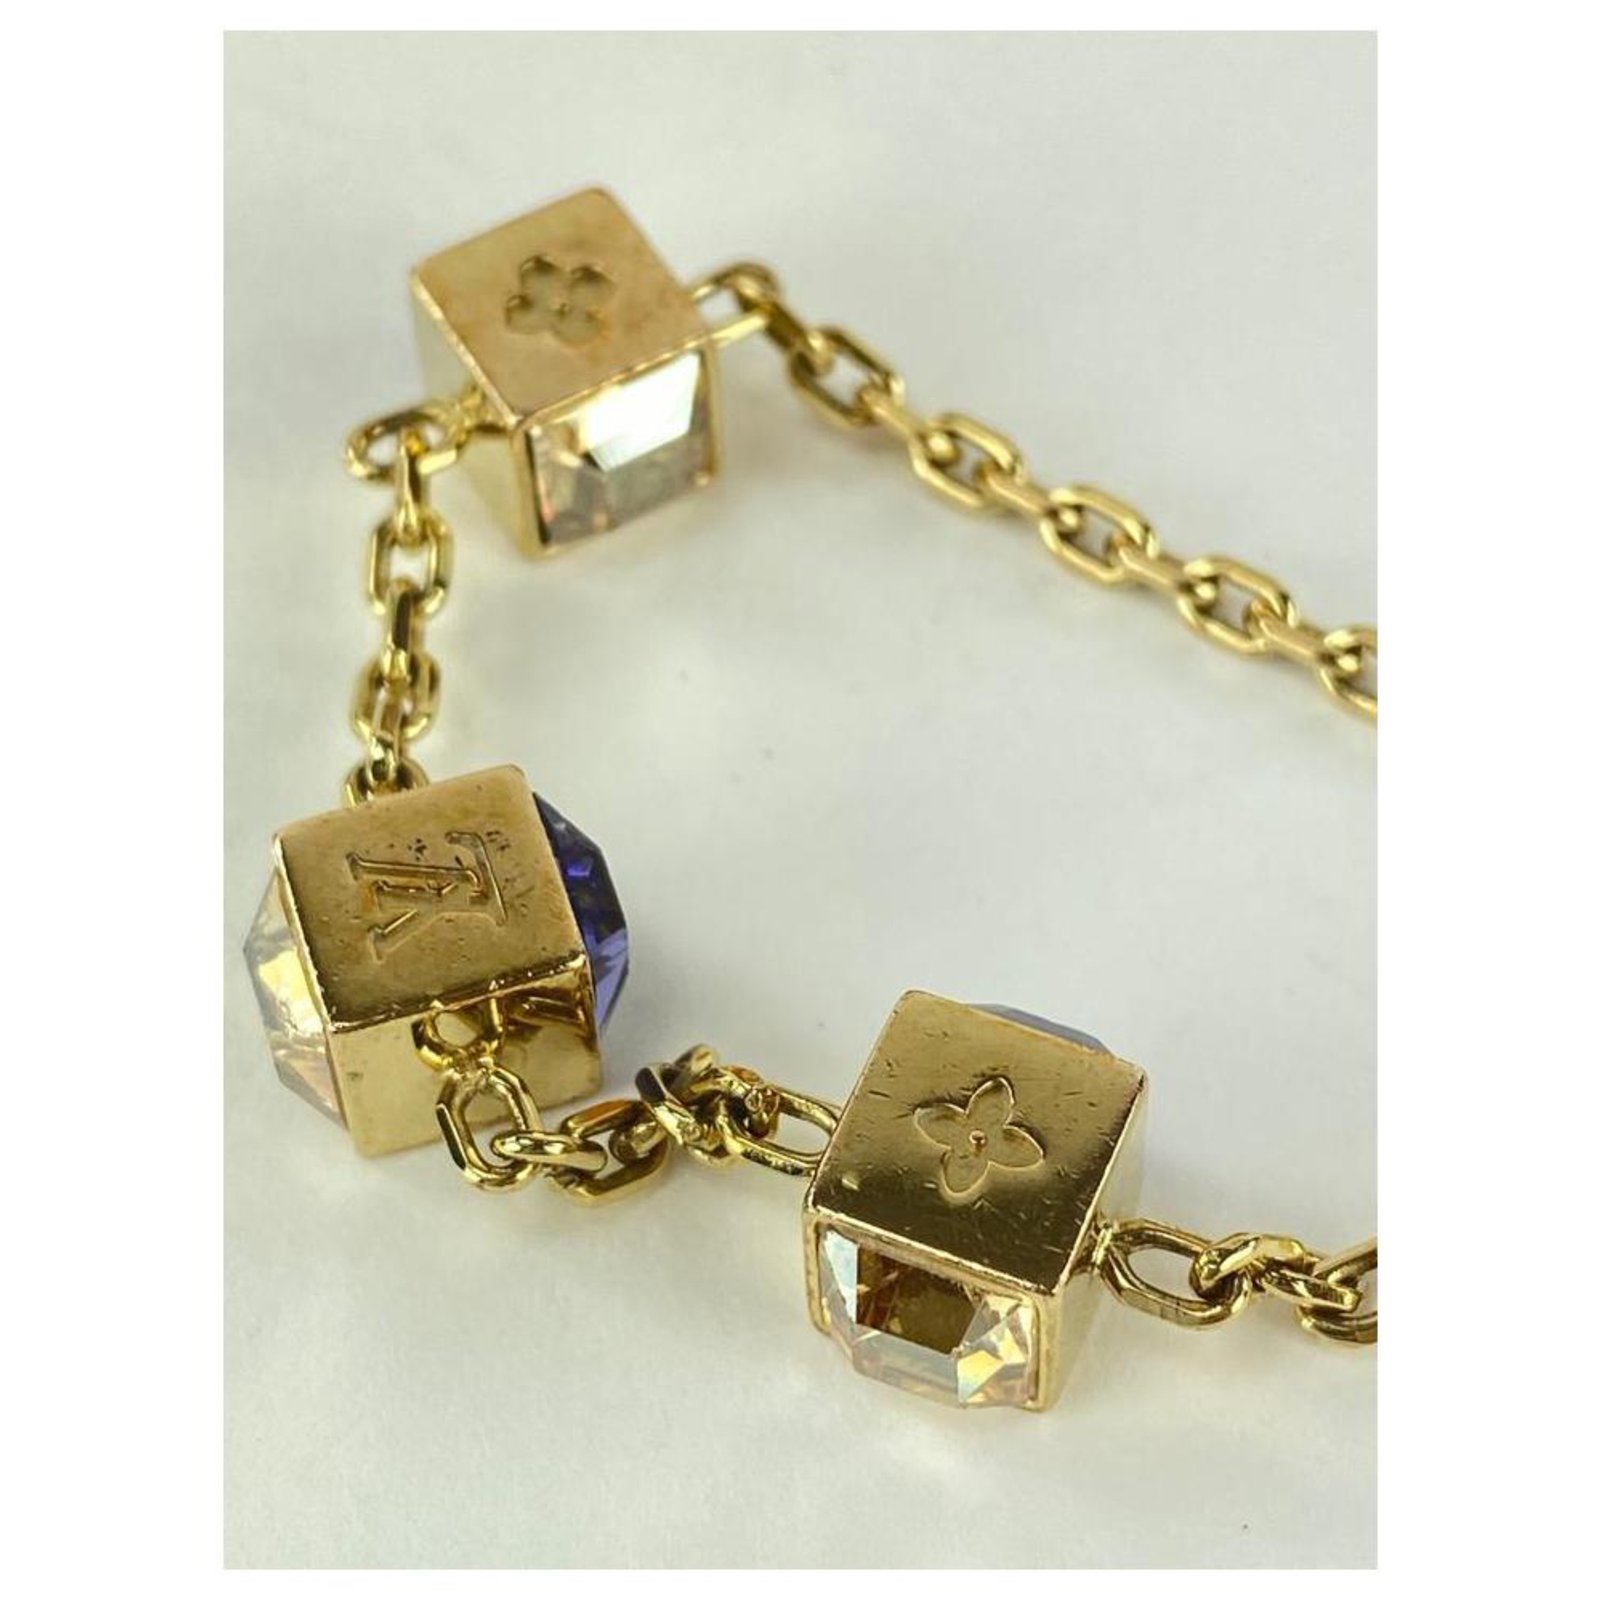 Louis Vuitton Crystal Dice Charm Gold Plated Luckygram Bracelet at 1stDibs   louis vuitton gold plated bracelet, louis vuitton lucky charm bracelet, lv  dice